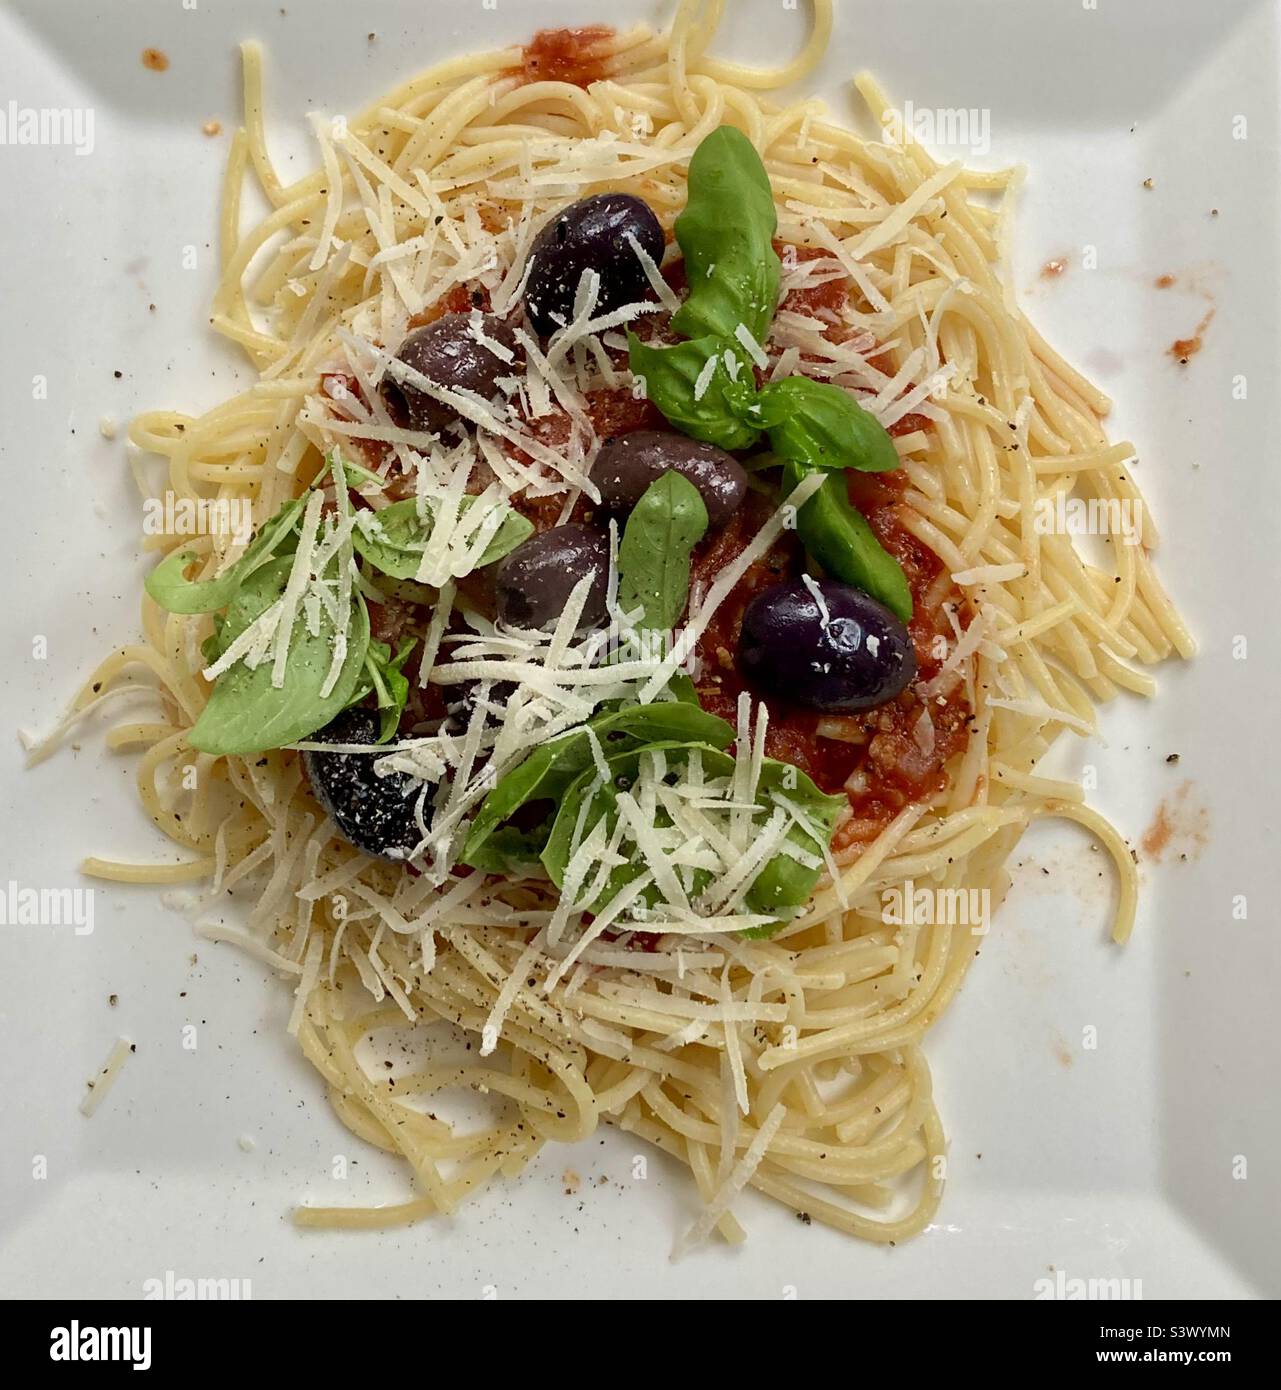 Homemade spaghetti sauce with gluten free pasta, topped with Kalamata olives, fresh garden picked basil, parmigiano reggiano and fresh cracked pepper. Stock Photo